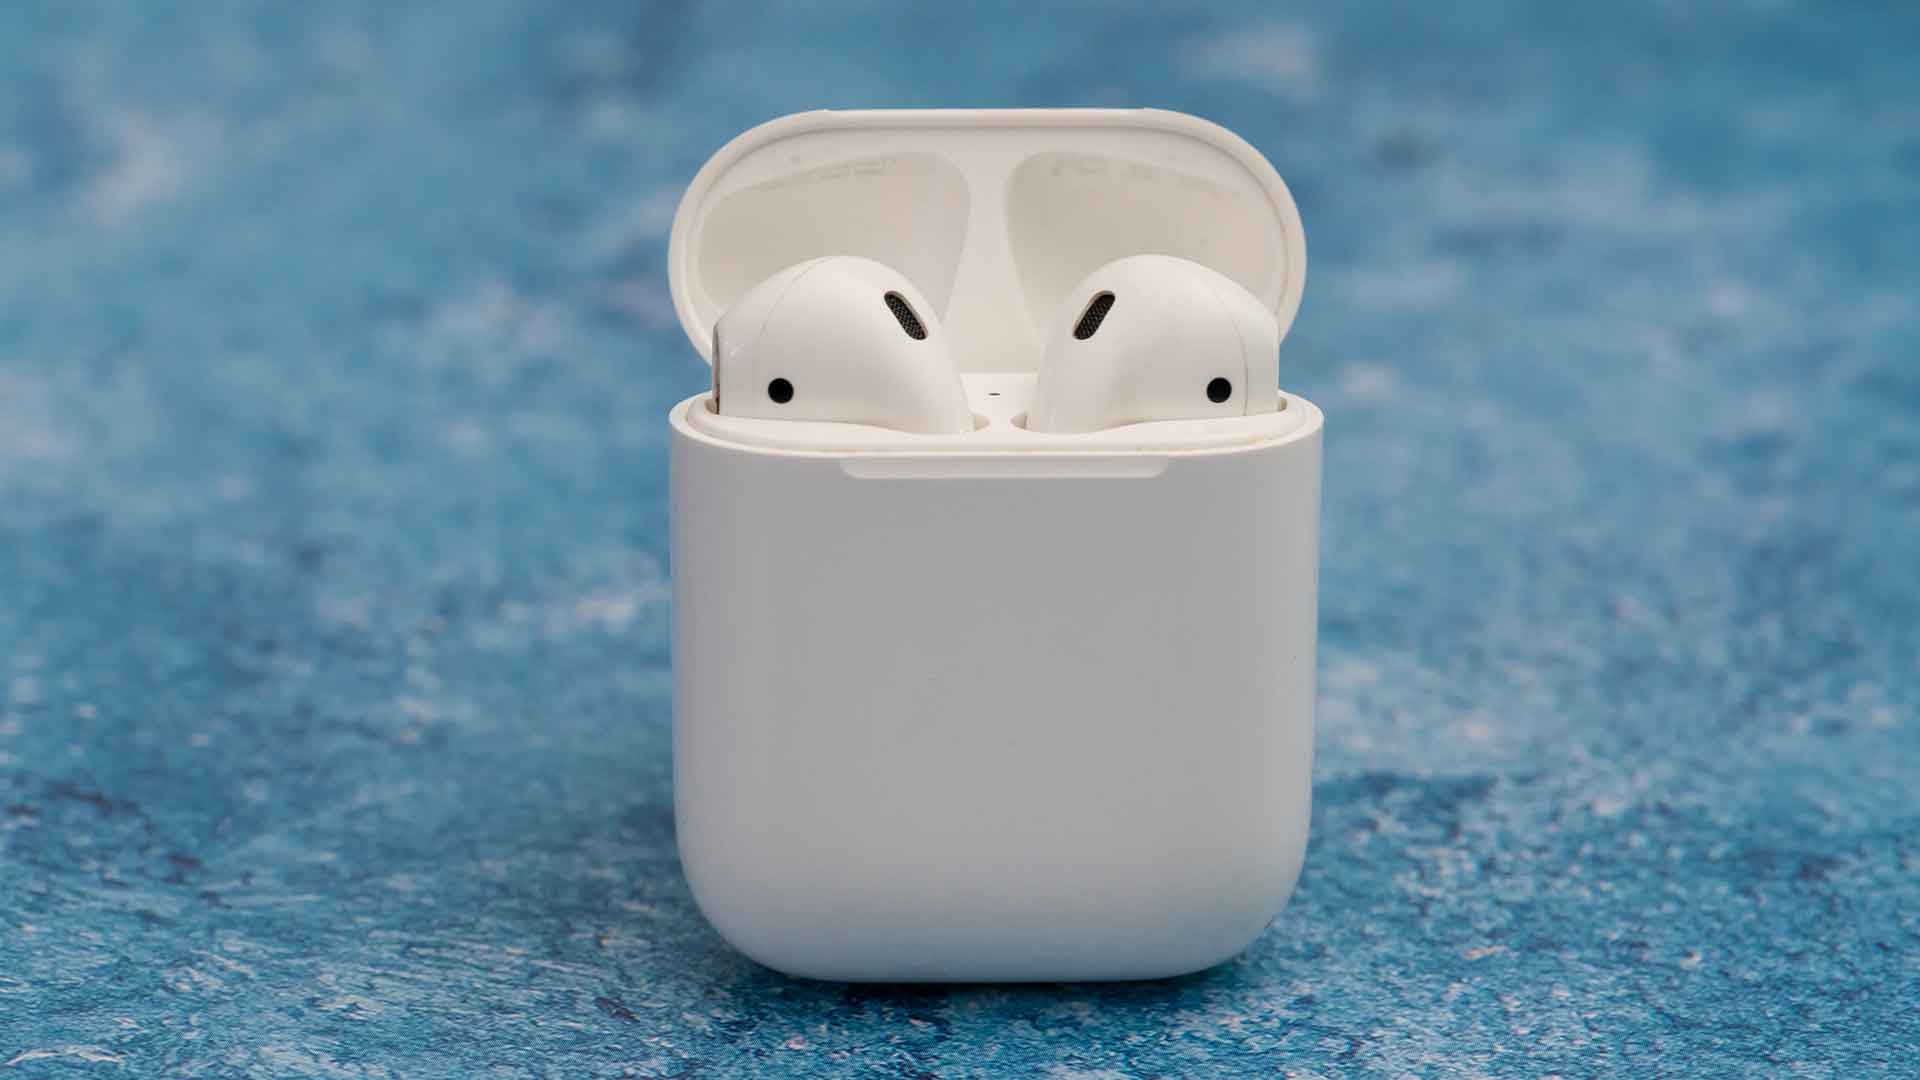 How to pair AirPods to peloton